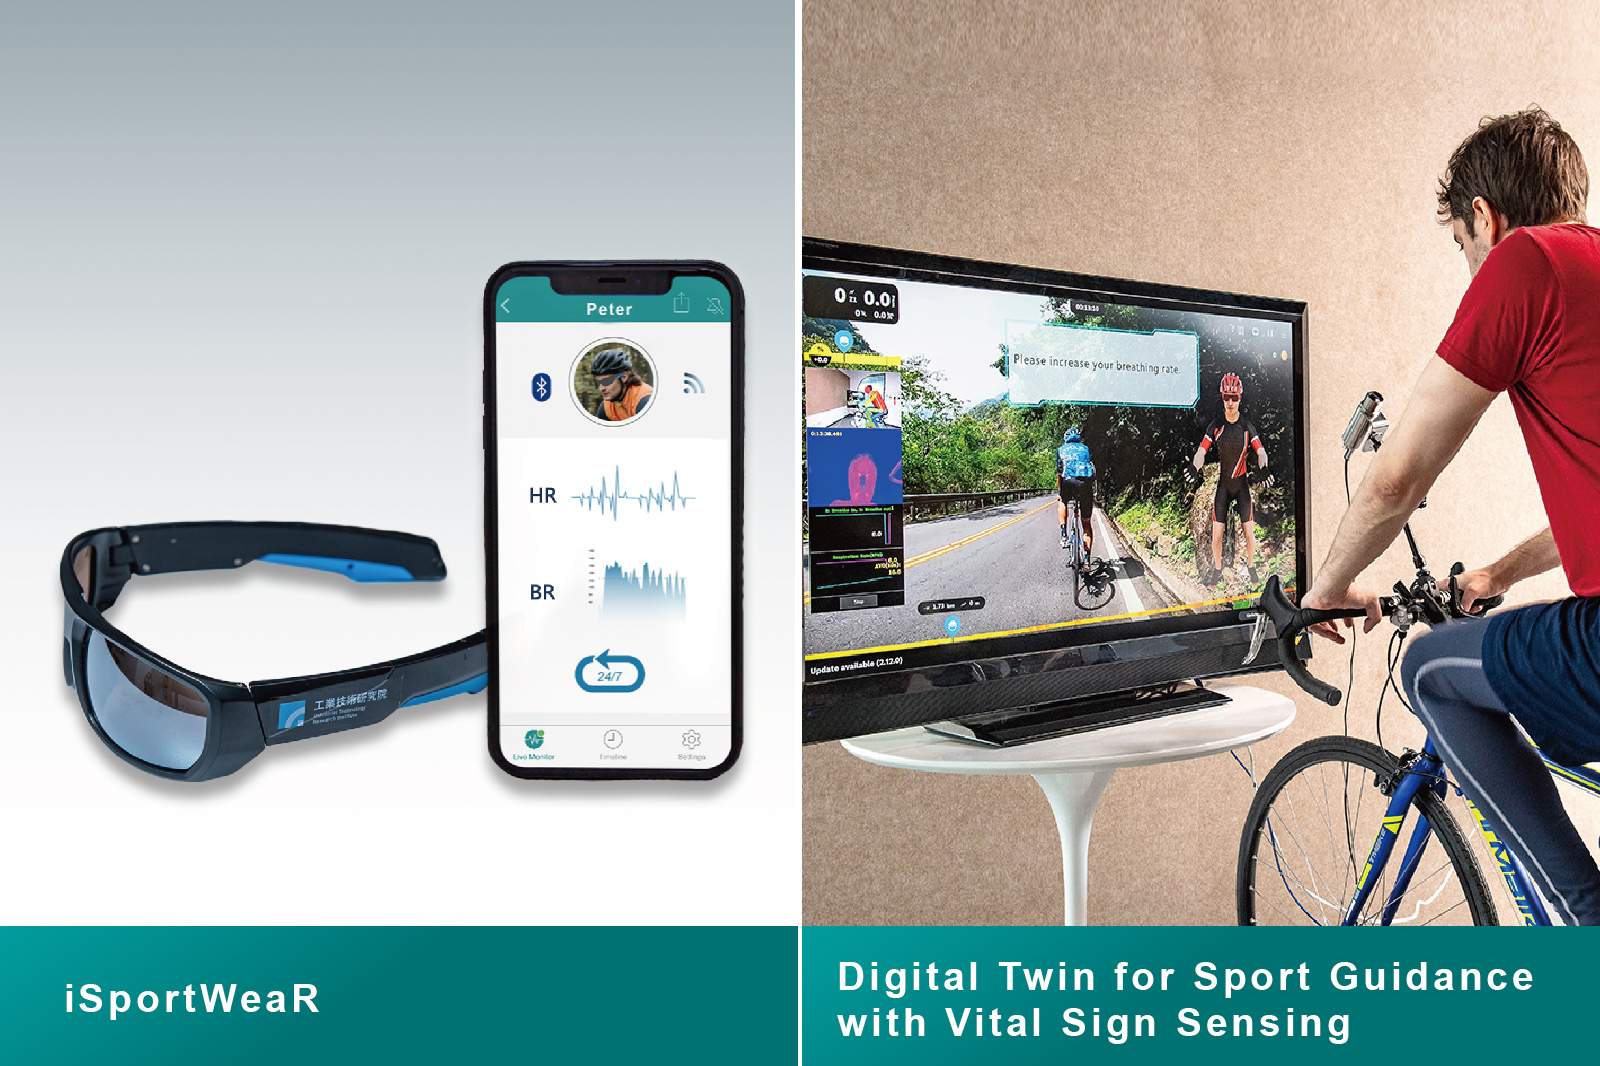 ITRI’s sports and fitness highlight technologies include iSportWeaR and the Digital Twin for Sport Guidance with Vital Sign Sensing.